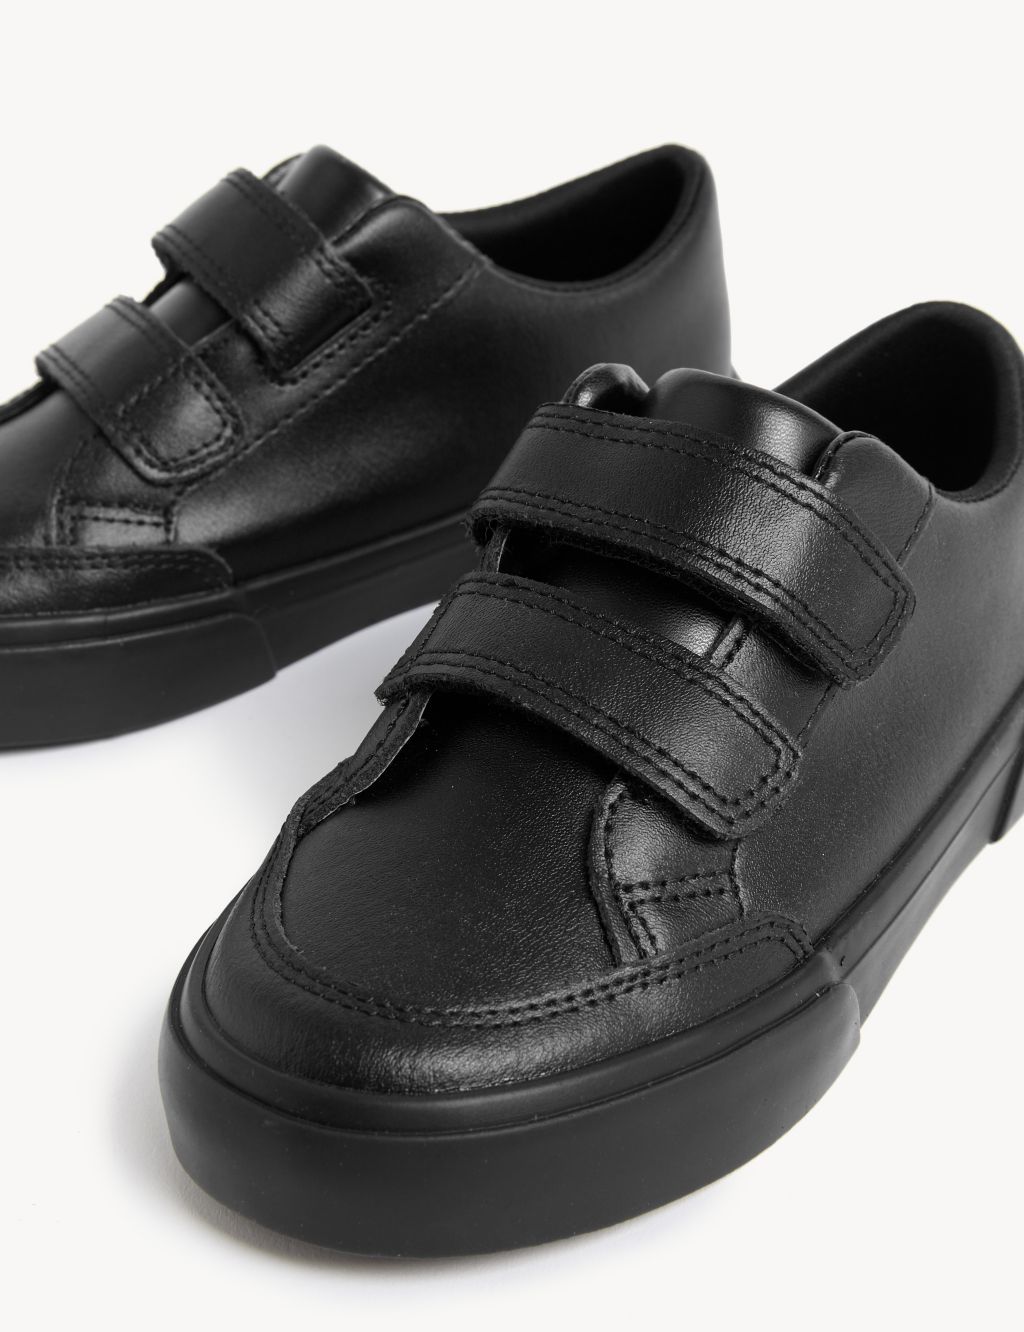 Kids' Leather Freshfeet™ School Shoes (8 Small - 2 Large) image 3